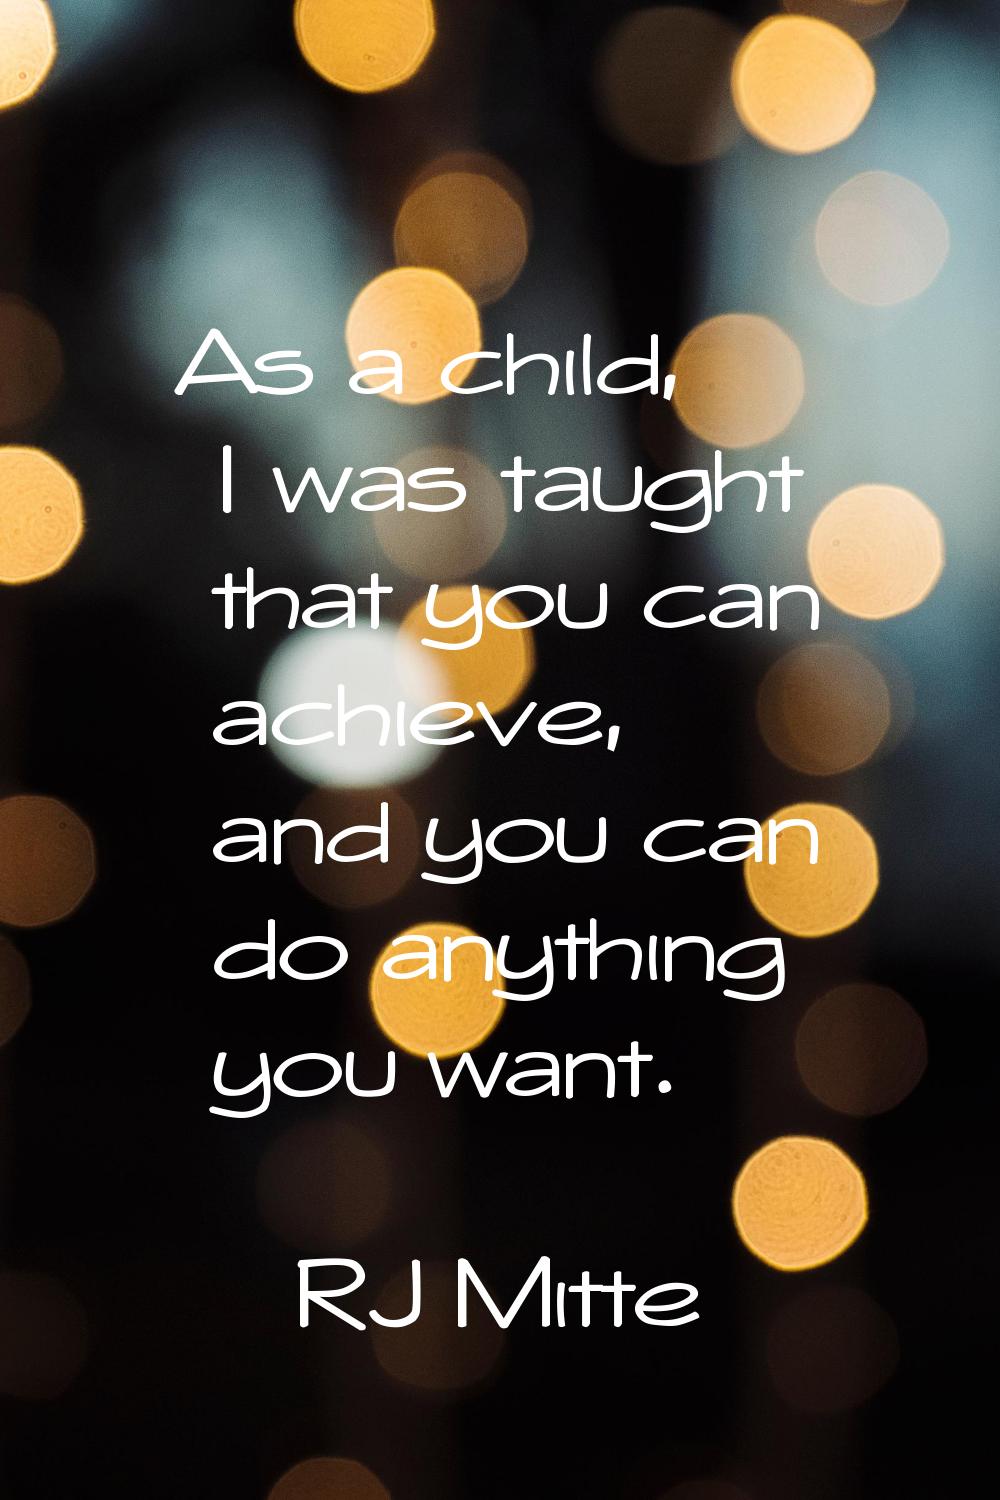 As a child, I was taught that you can achieve, and you can do anything you want.